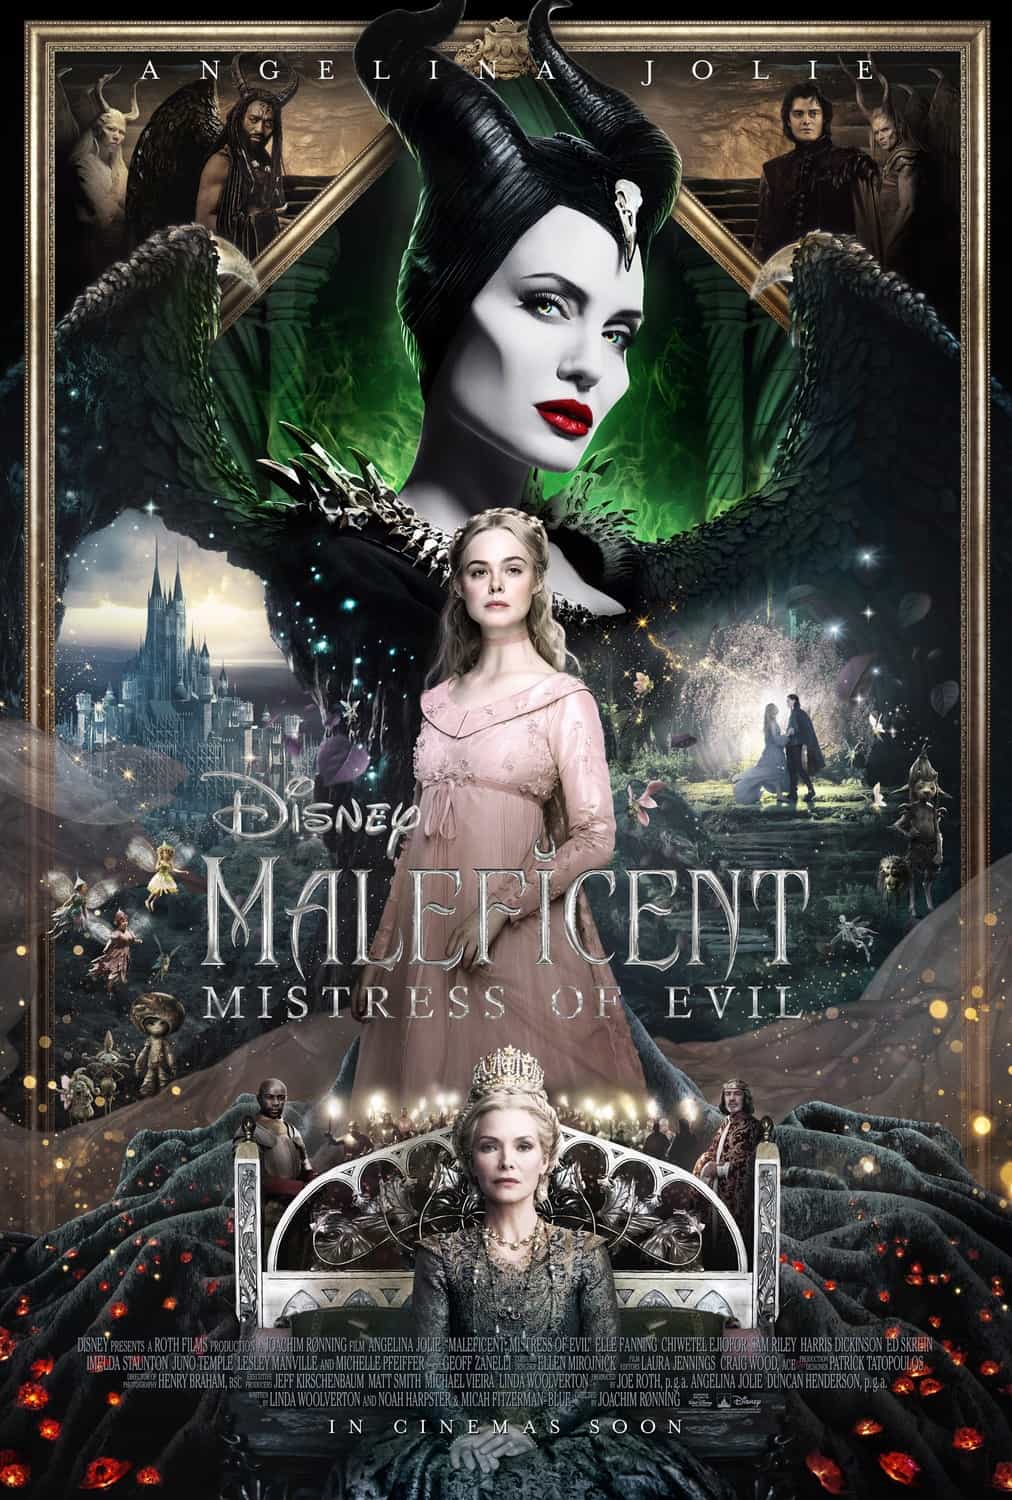 US Box Office Analysis 18 - 20 October 2019:  Maleficent sequel tops on a quiet weekend at the box office with Zombieland 2 also making its debit